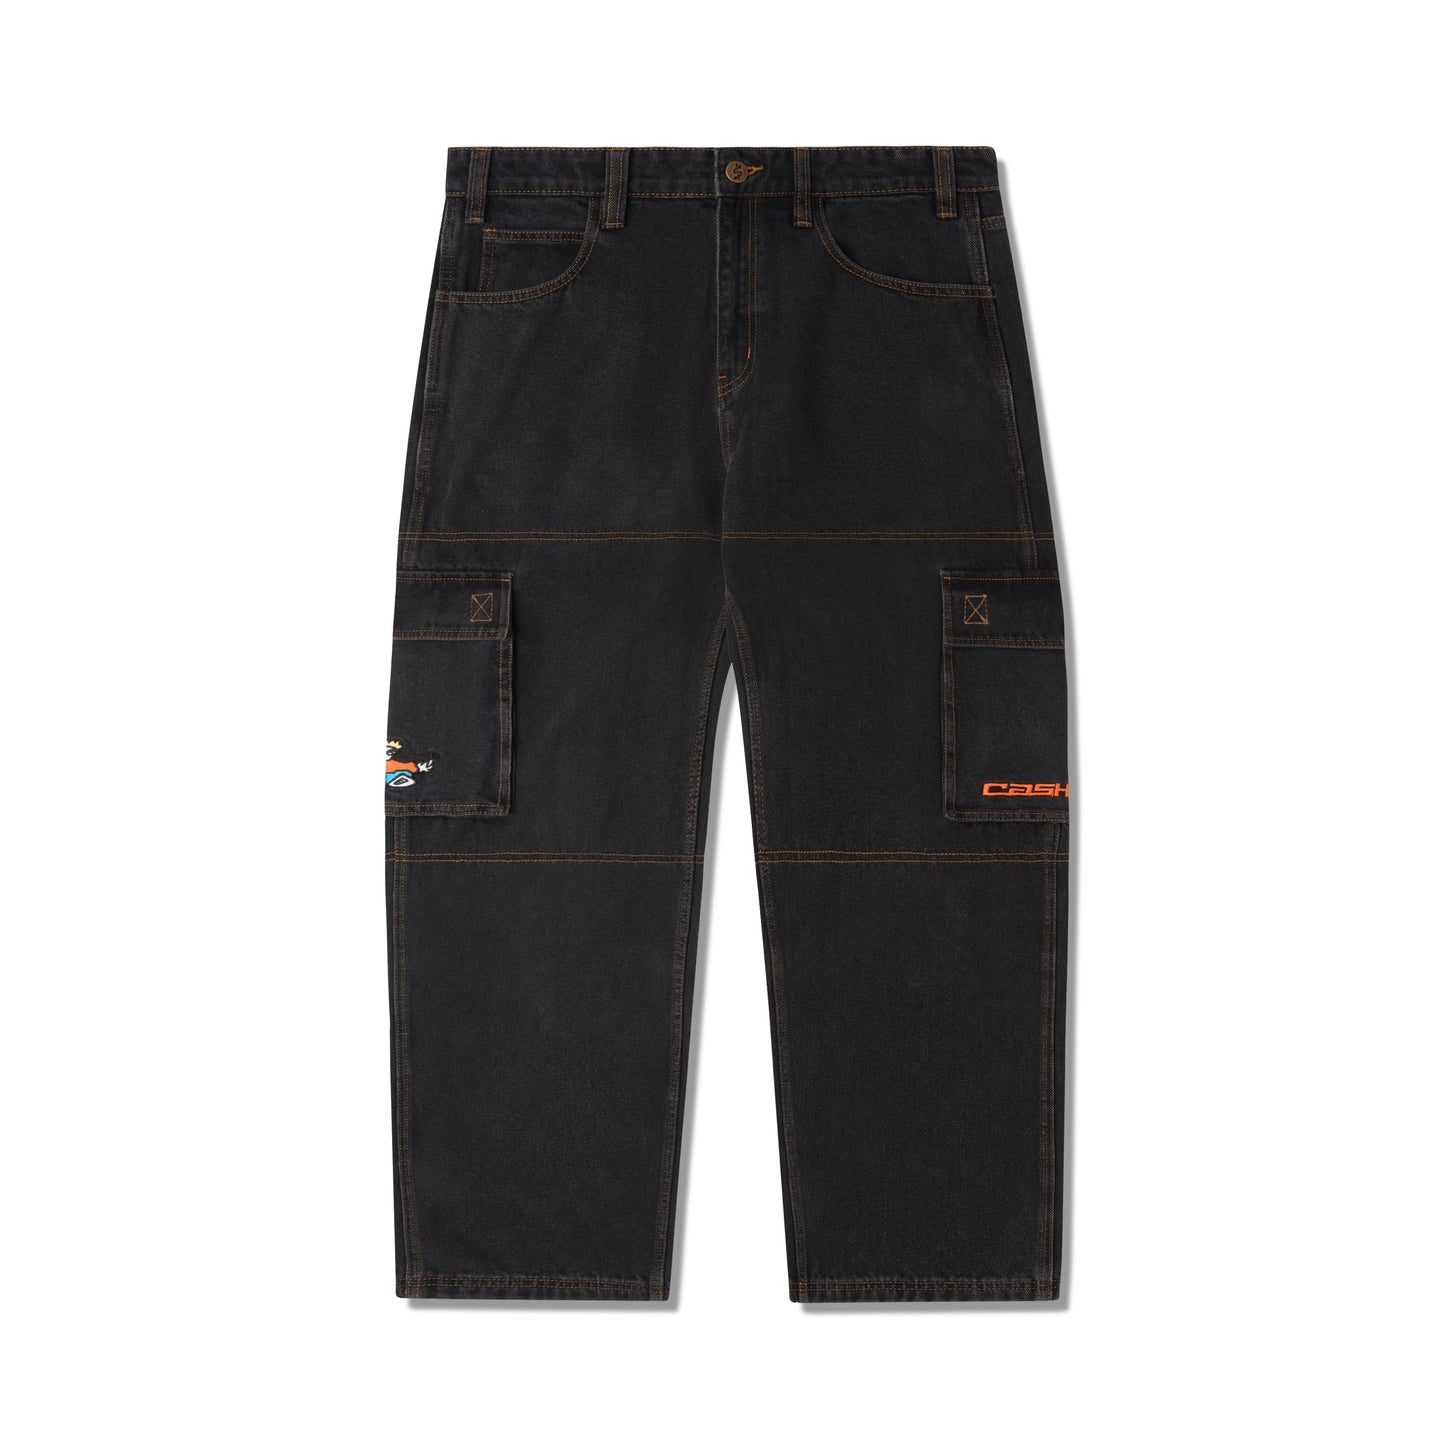 CASH ONLY DIST ALEKA CARGO JEANS FADED BLACK